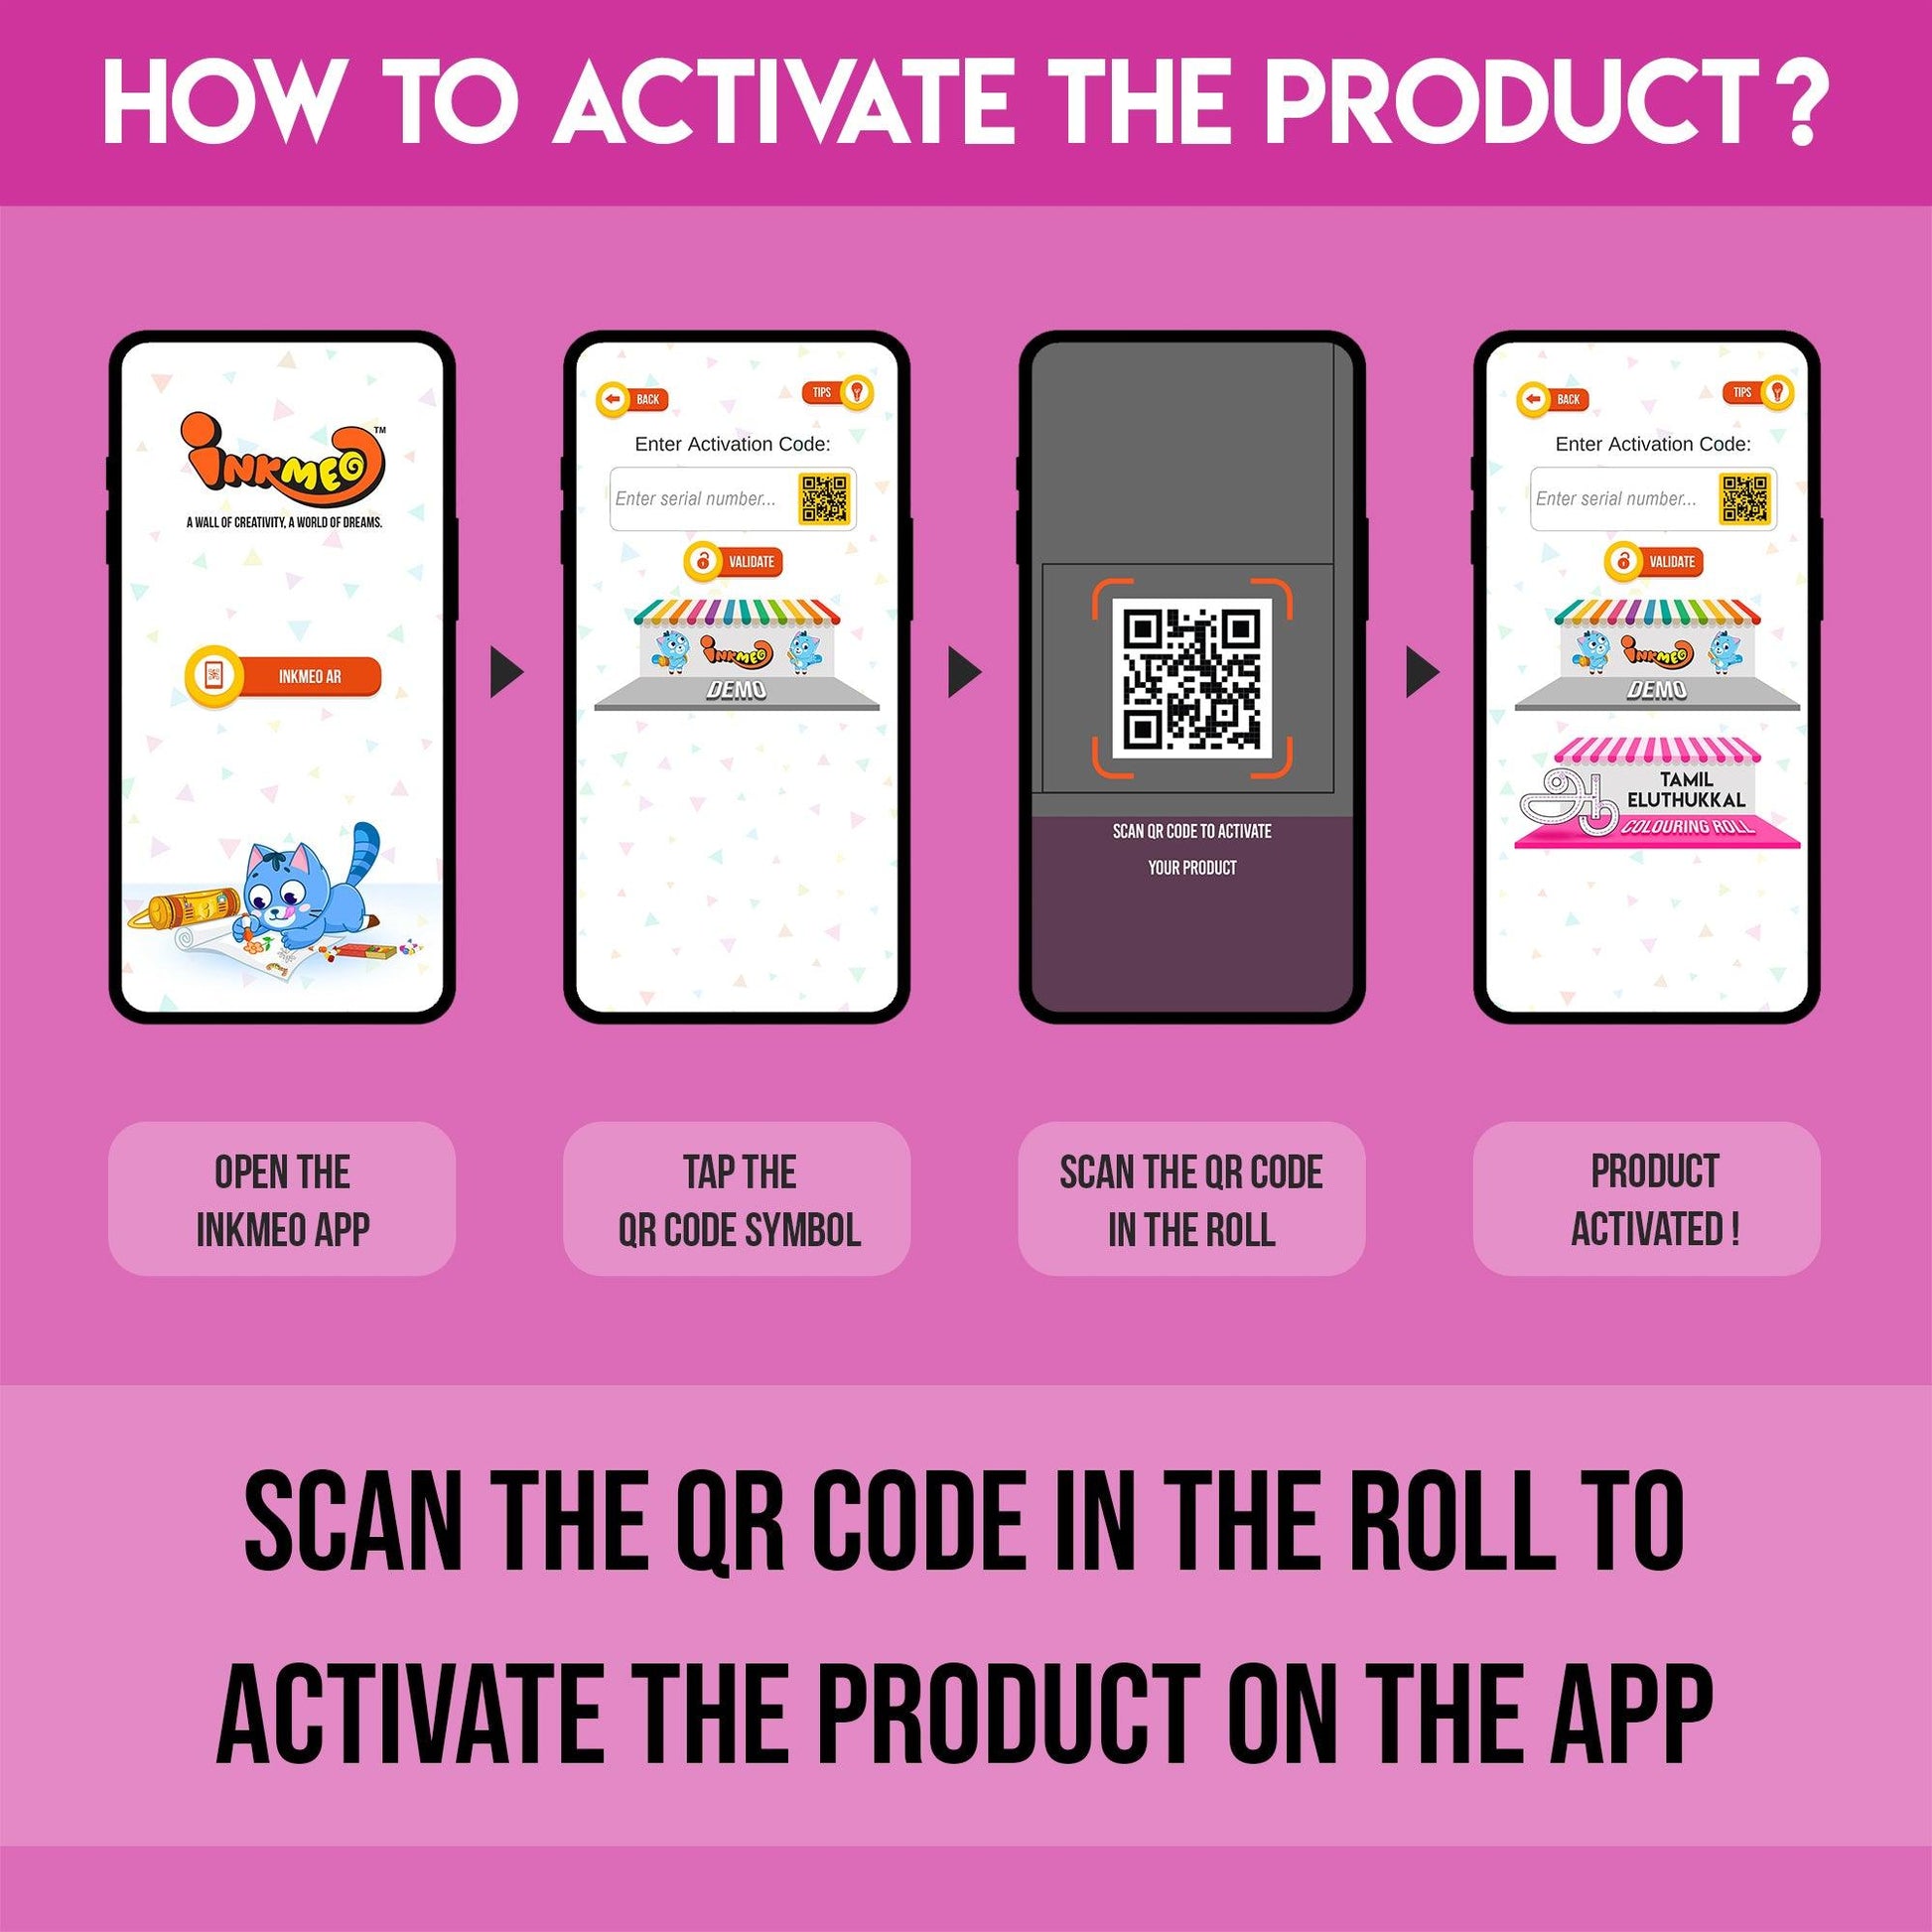 The image demonstrates how to activate the product: the first step is to open the Inkmeo app, the second step is to tap the QR code symbol, the third step is to scan the QR code on the packaging, and the fourth step is the product activated.